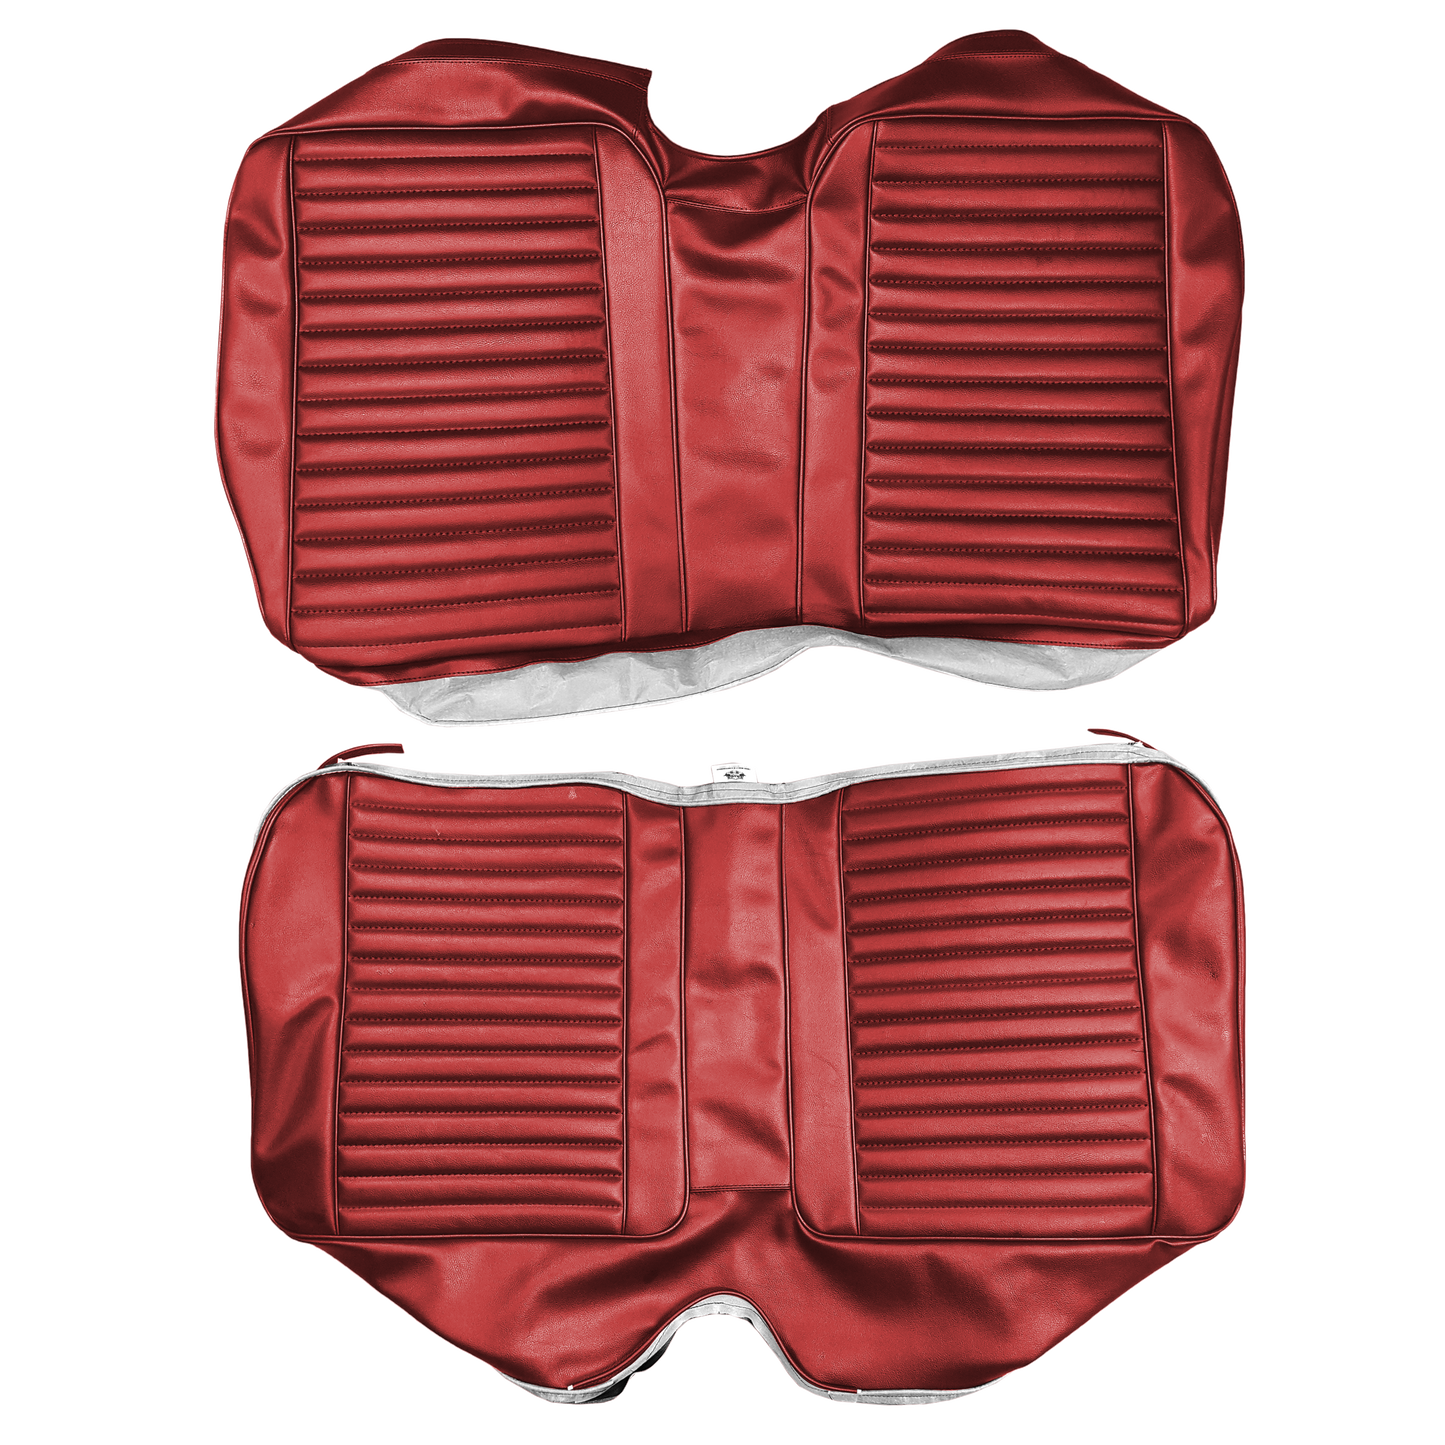 69 BARRACUDA "STANDARD" FASTBACK REAR UPHOLSTERY- RED